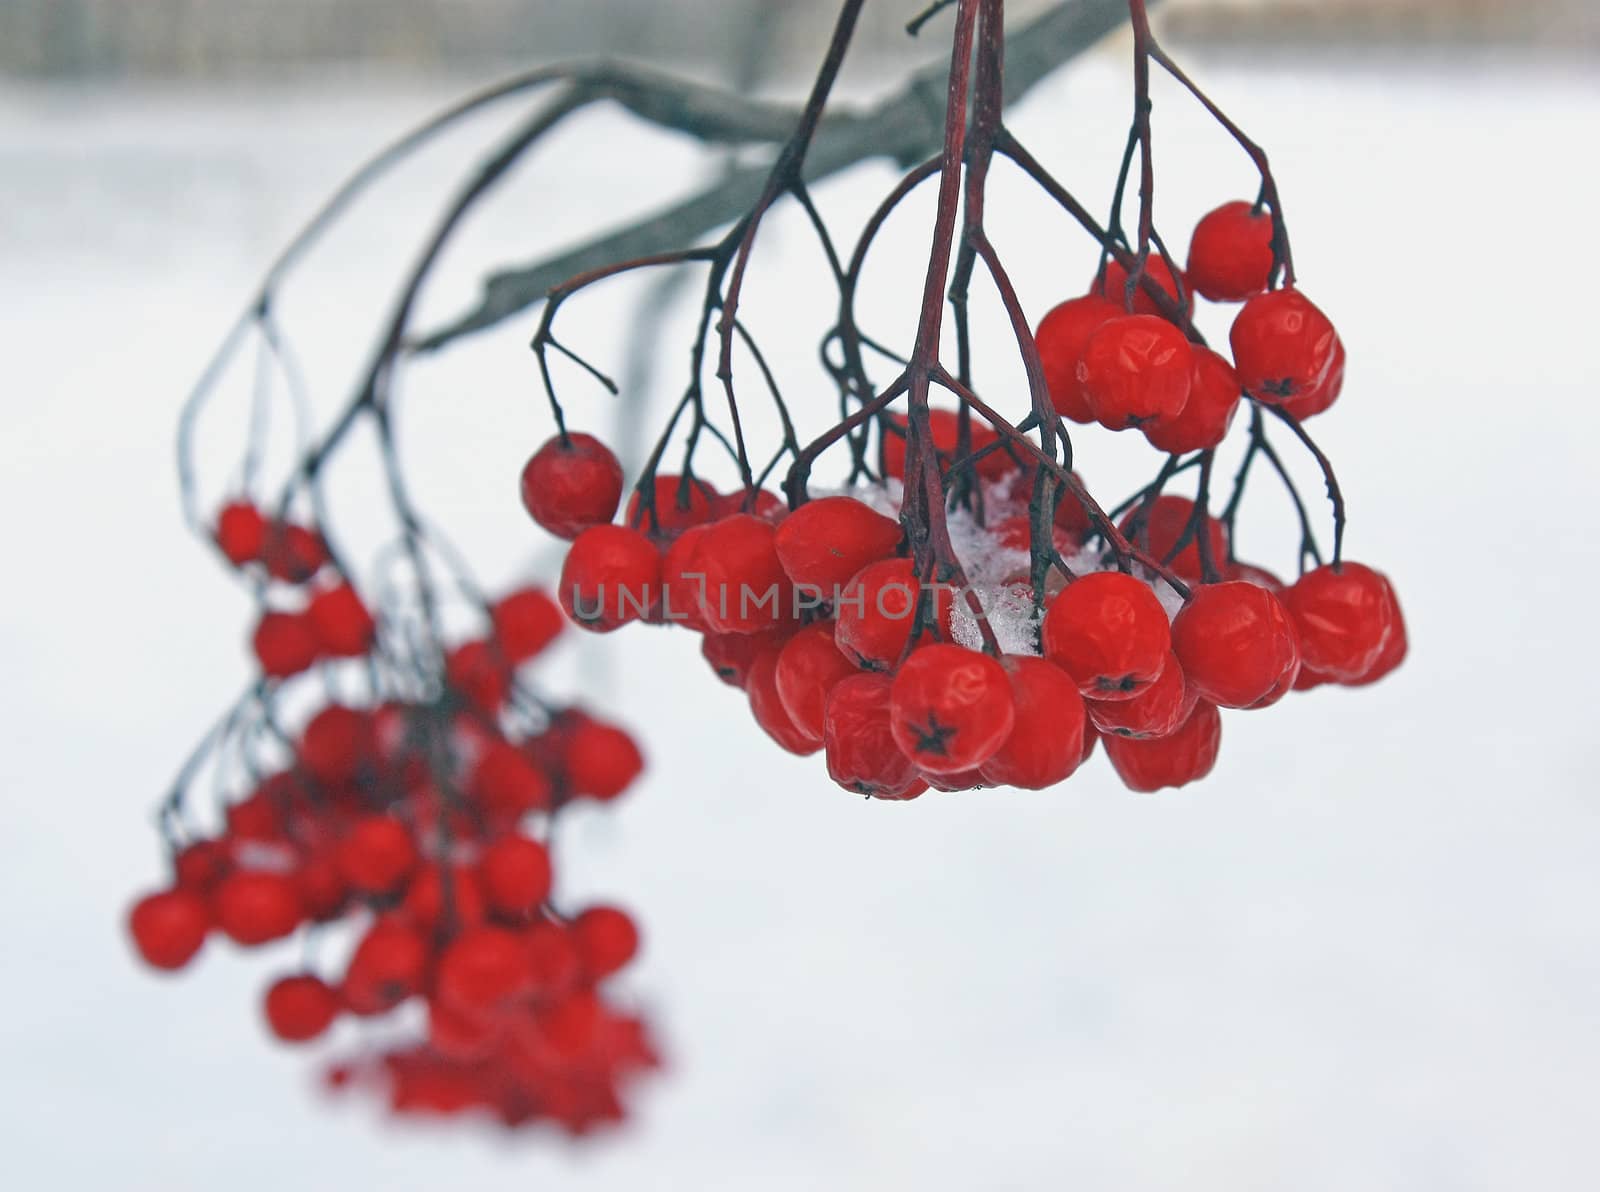 There has come winter. Snow has dropped out. On red berries white snow lies.